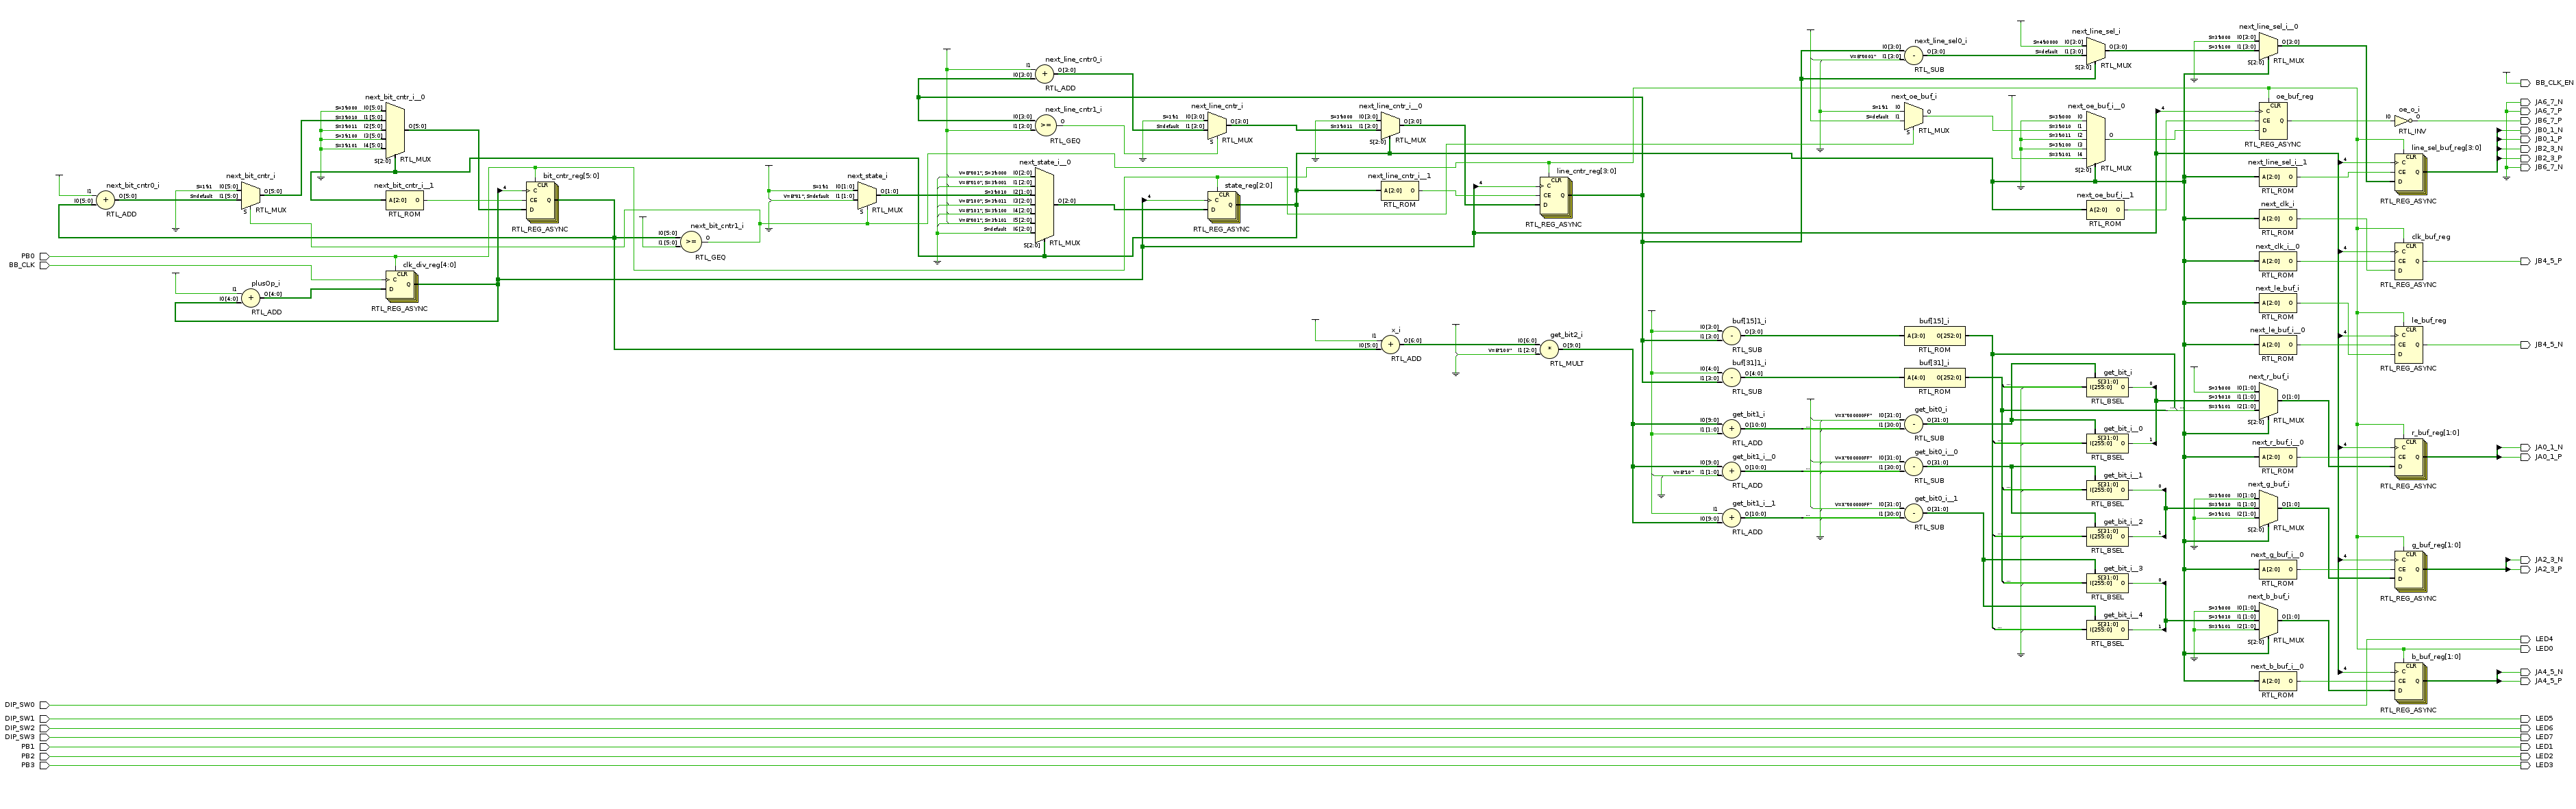 /img/kerst_vhdl_schema.png